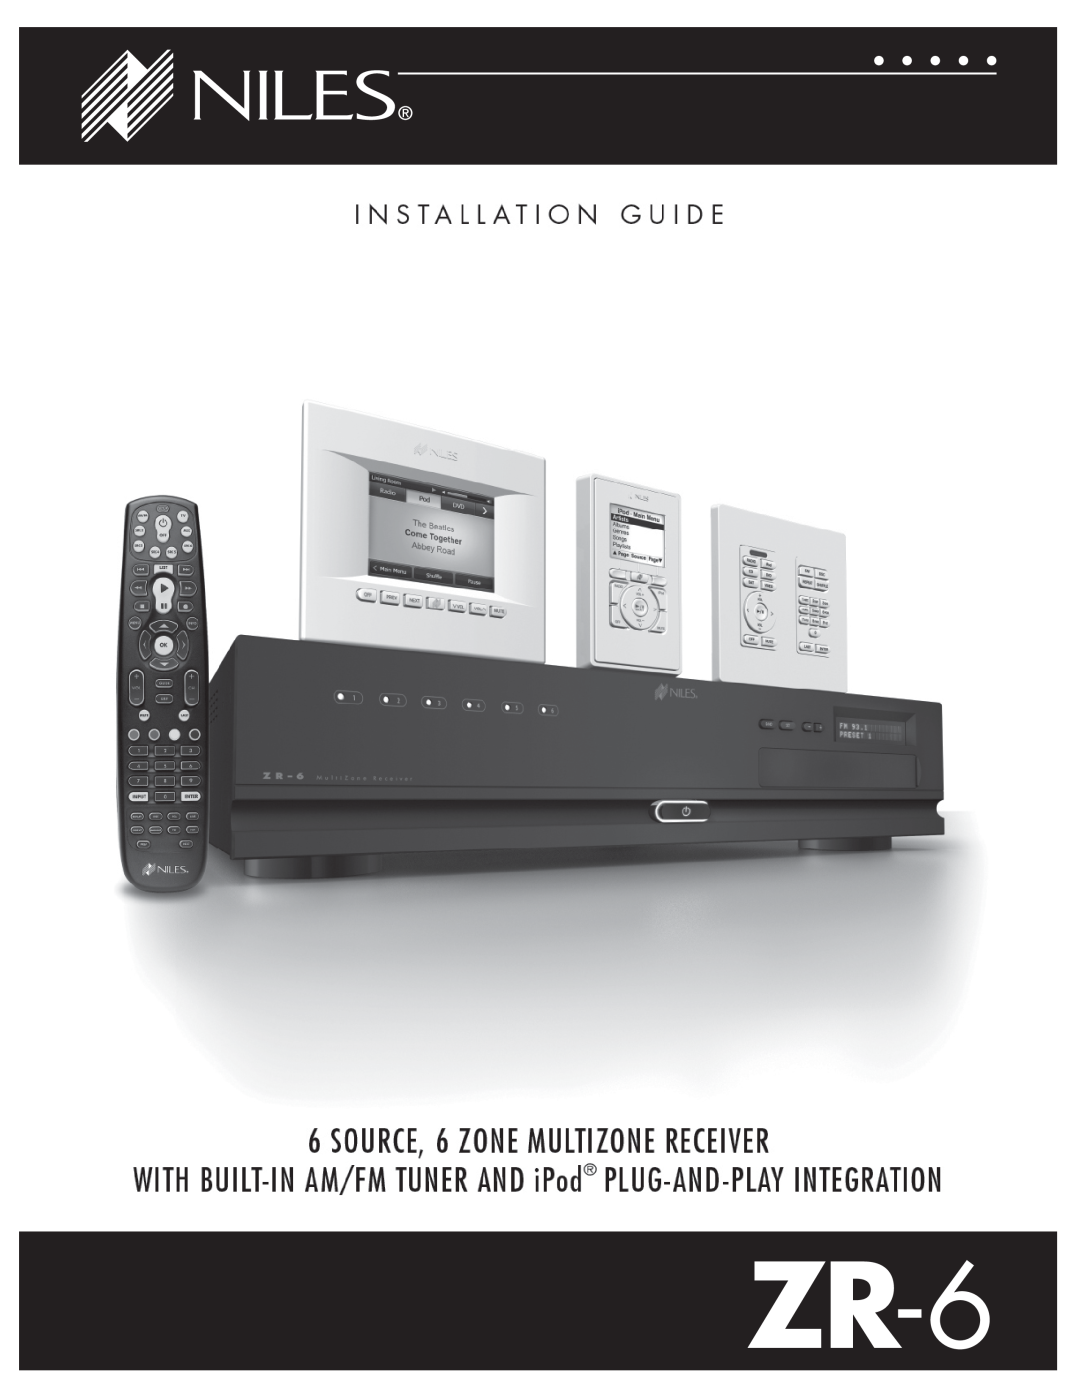 Niles Audio manual Specifications Sheet, Key Features, Simply Perfect, ZR-6 6 SOURCE, 6 ZONE AUDIO MULTIZONE RECEIVER 